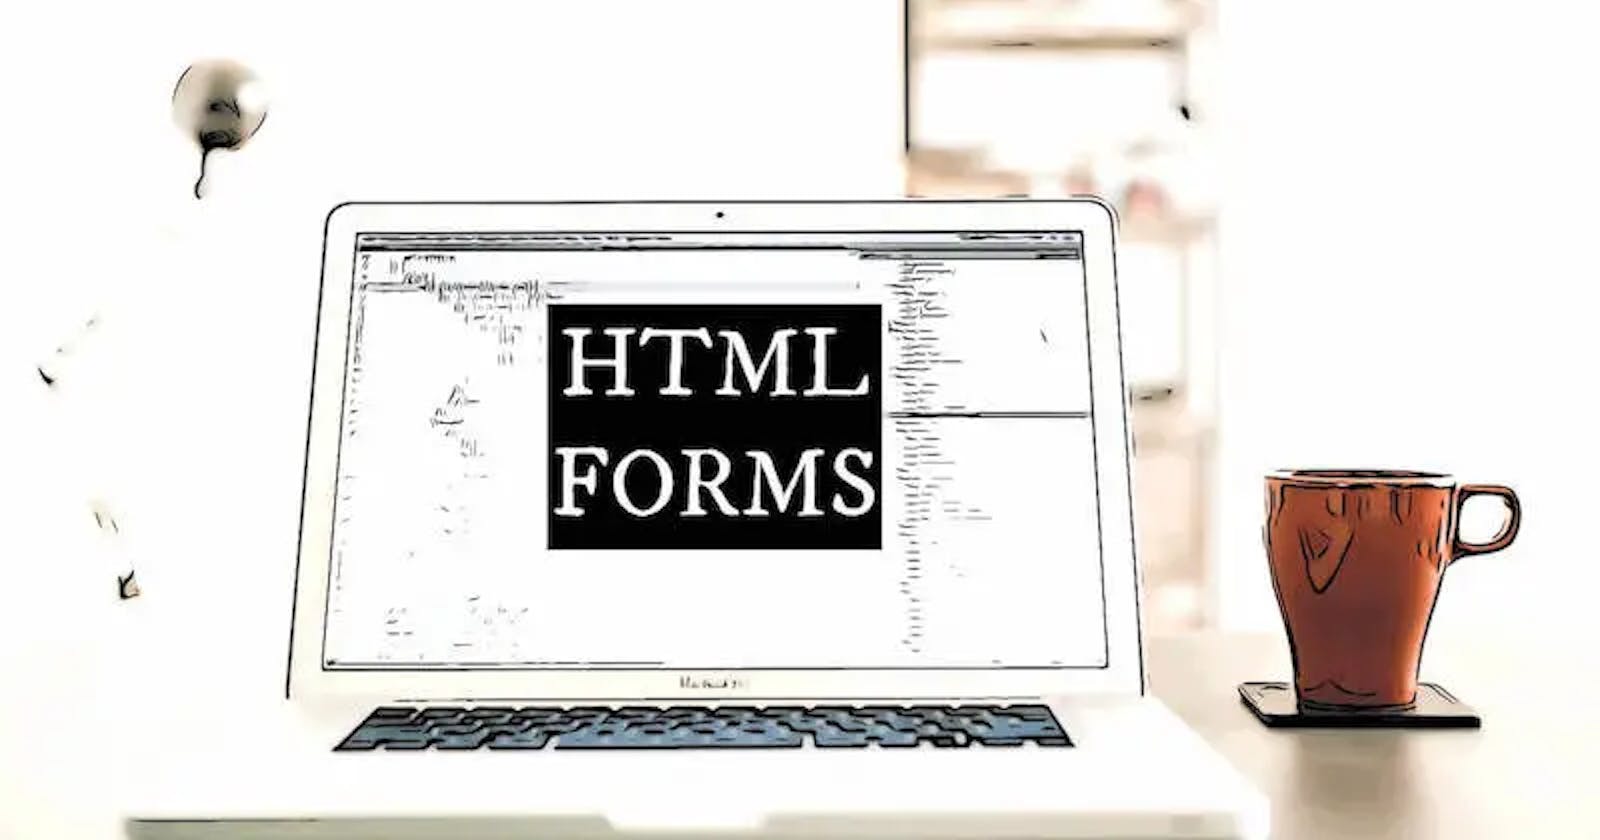 How to Create Forms in Html ?